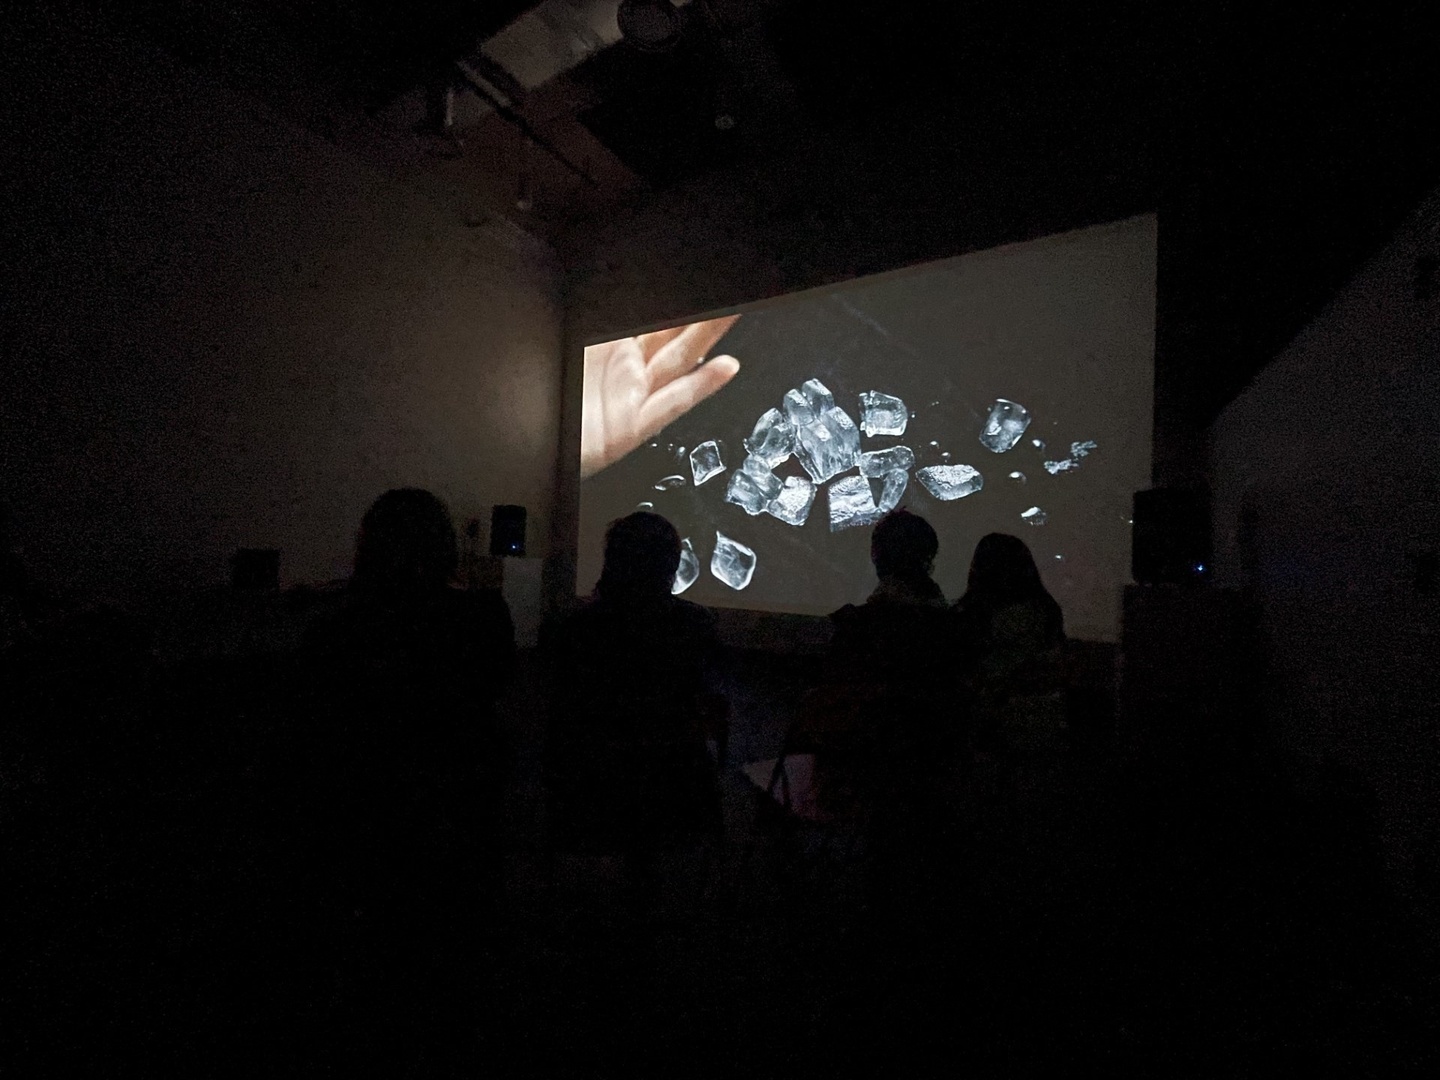 Photo in a darkened room, of people watching a screening of a film